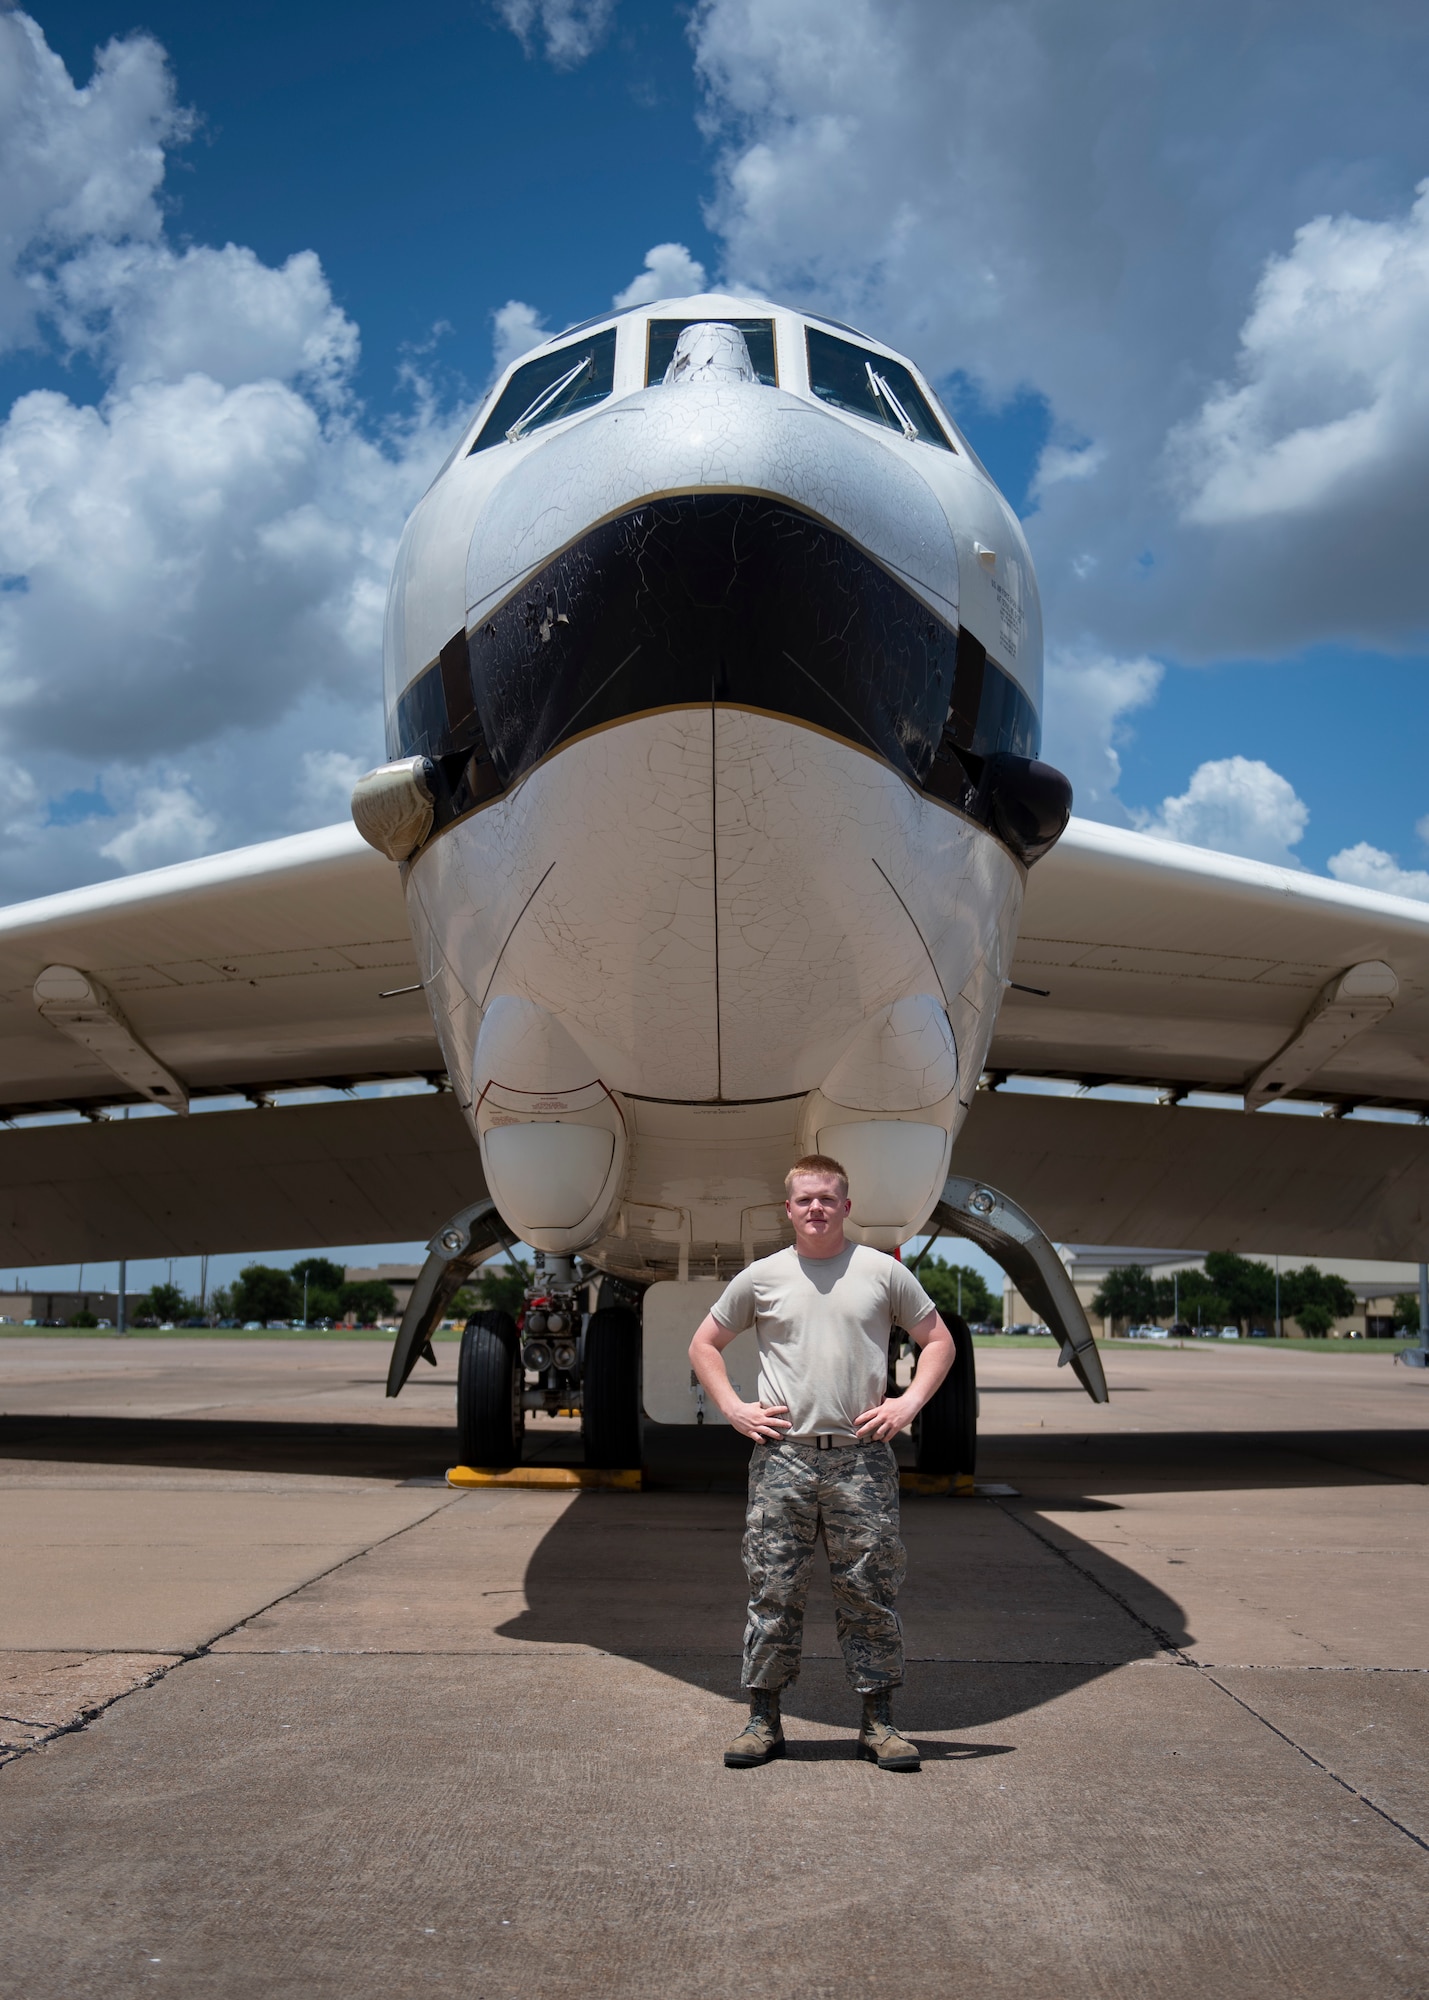 Airman Brycen Brooks, 362nd Training Squadron B-52 crew chief apprentice course student, poses for a picture in front of a B-52 Stratofortress at Sheppard Air Force Base, Texas, July 2, 2019. Brooks is originally from Warner Robins, Georgia. His favorite part about his job is that he gets to work on an aircraft and even just learning about it is  enjoyable. When asked about his favorite aircraft he said "B-52 all the way." (U.S. Air Force photo by Airman 1st Class Pedro Tenorio)